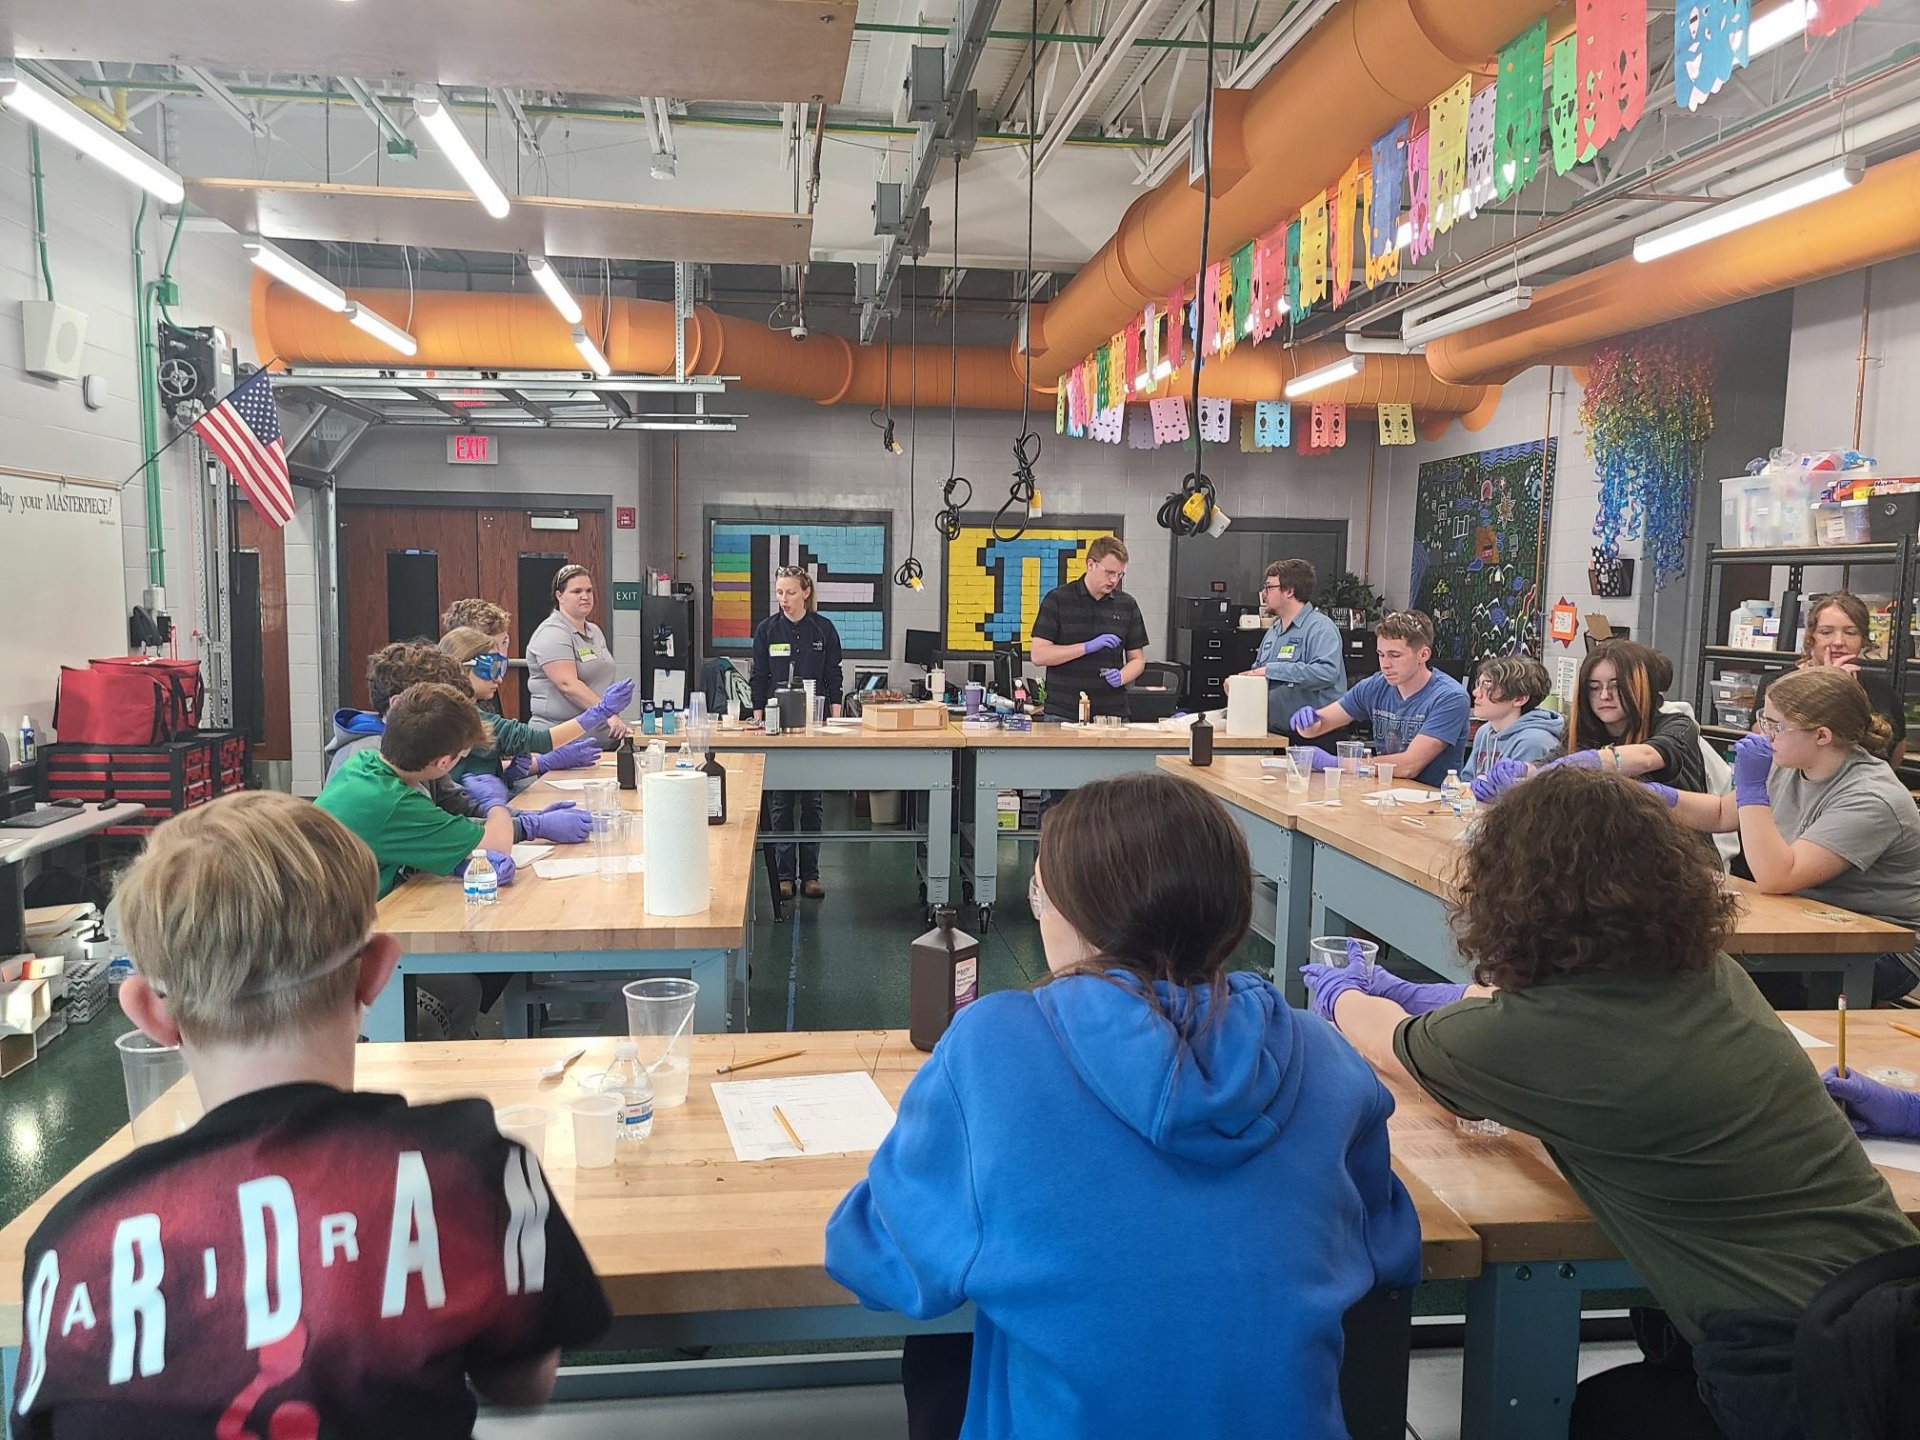 Chemical Reactions Get Big Student Reactions During Monument’s Classroom Takeover at STEAM Labs 